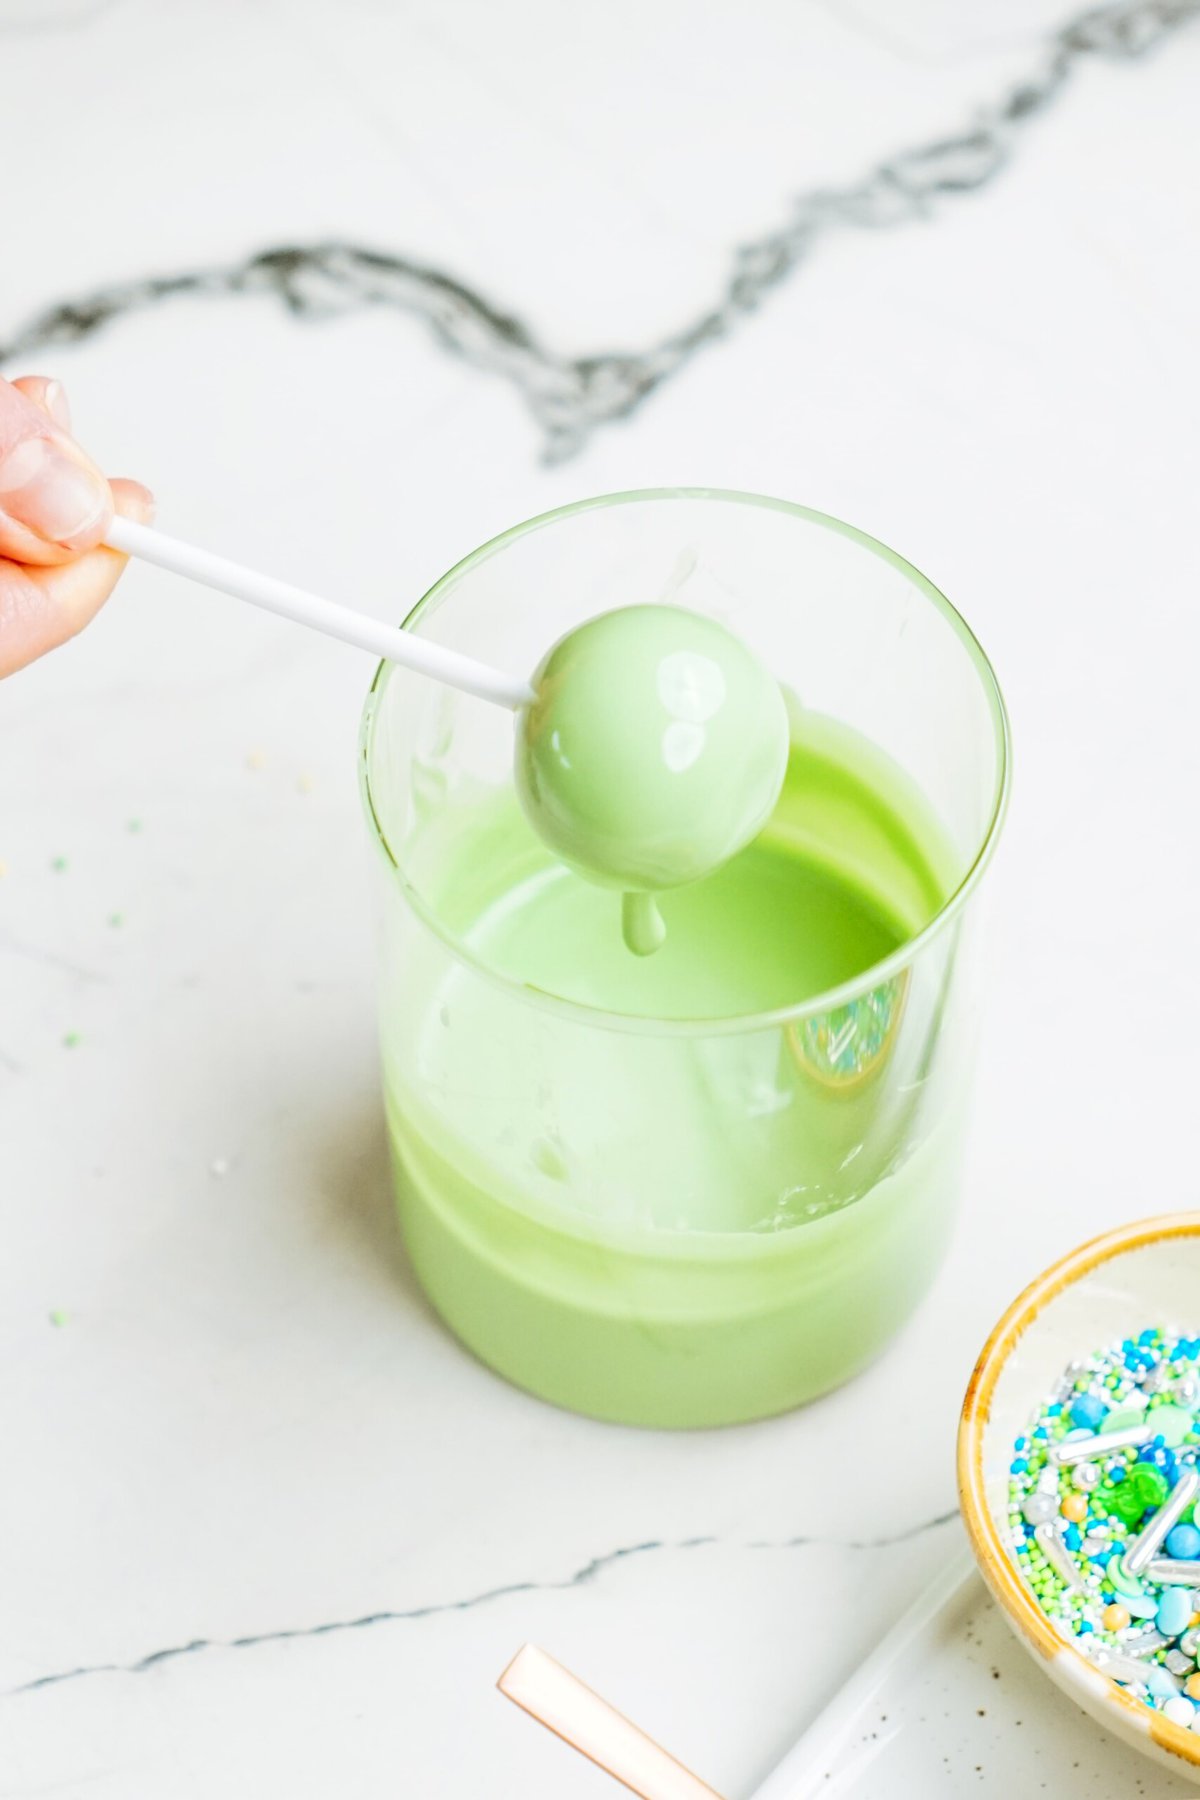 A person dipping a cake pop in melted green candy coating